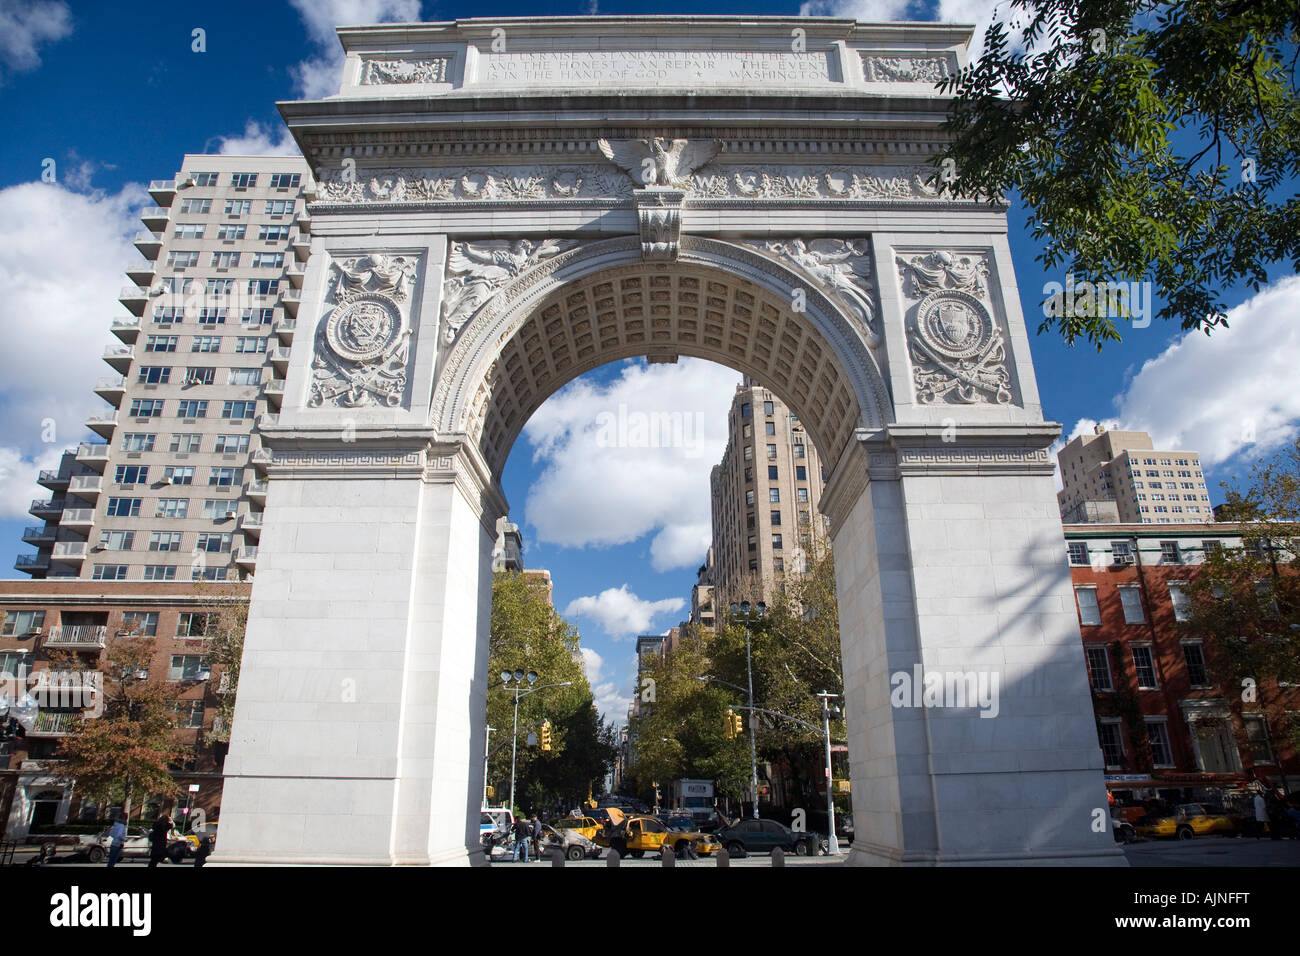 View of the 5th Avenue in NYC through the Arch of Washington Square, USA. Stock Photo